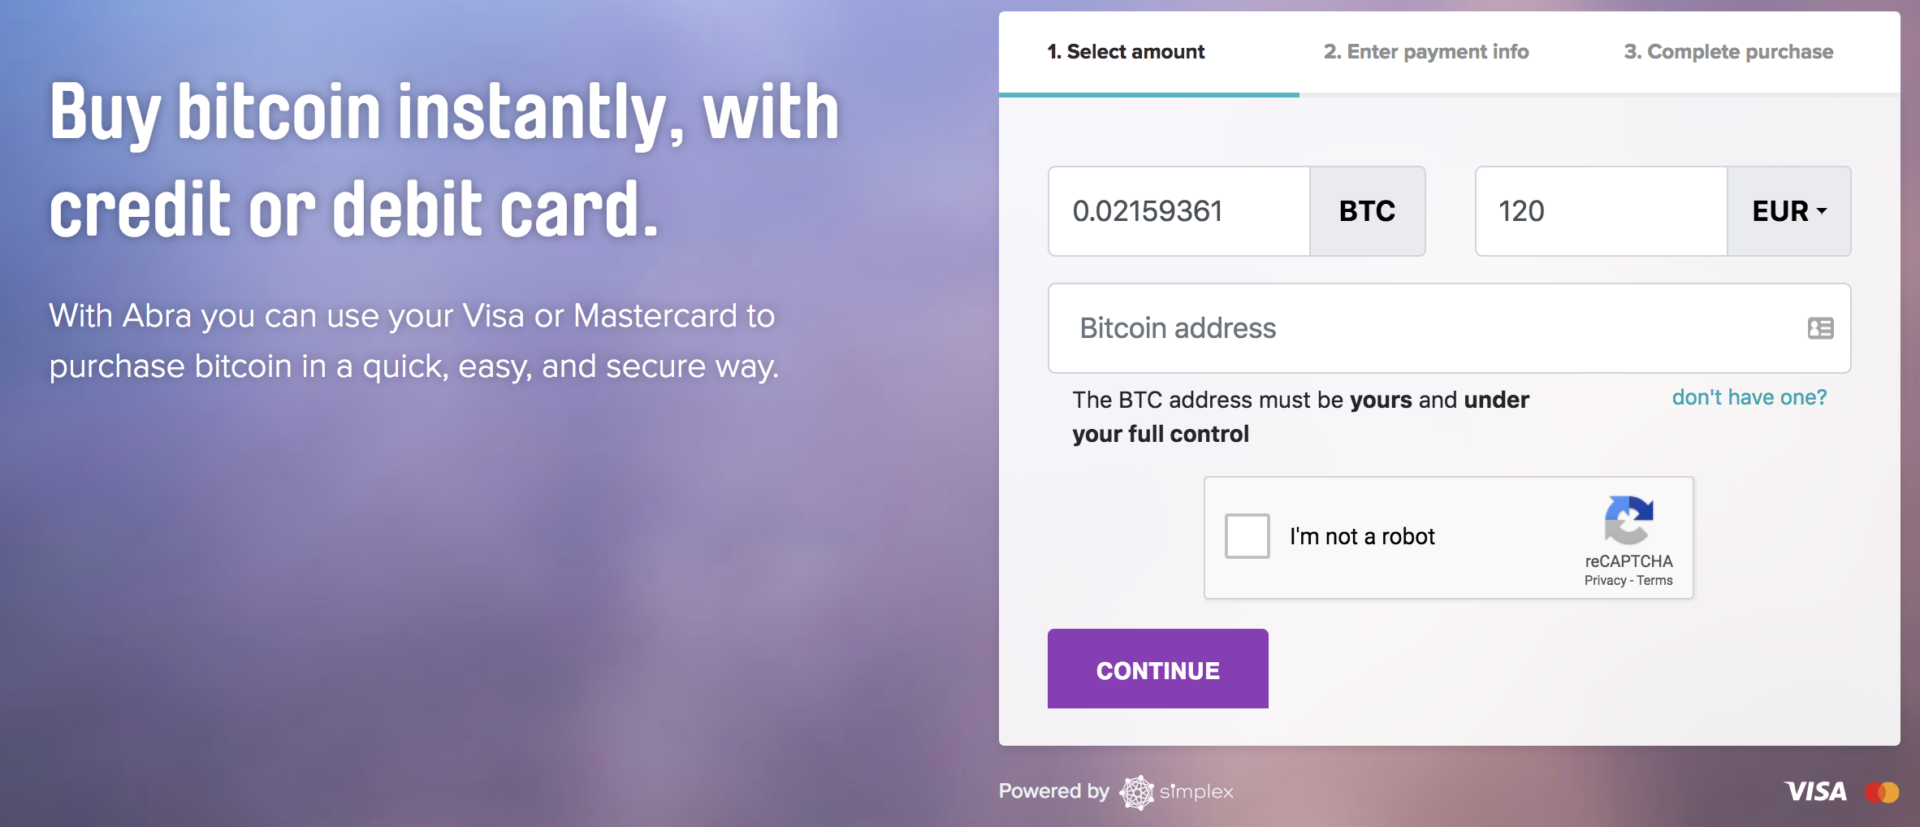 Bitcoin Purchase with Credit/Debit Cards on Abra 13